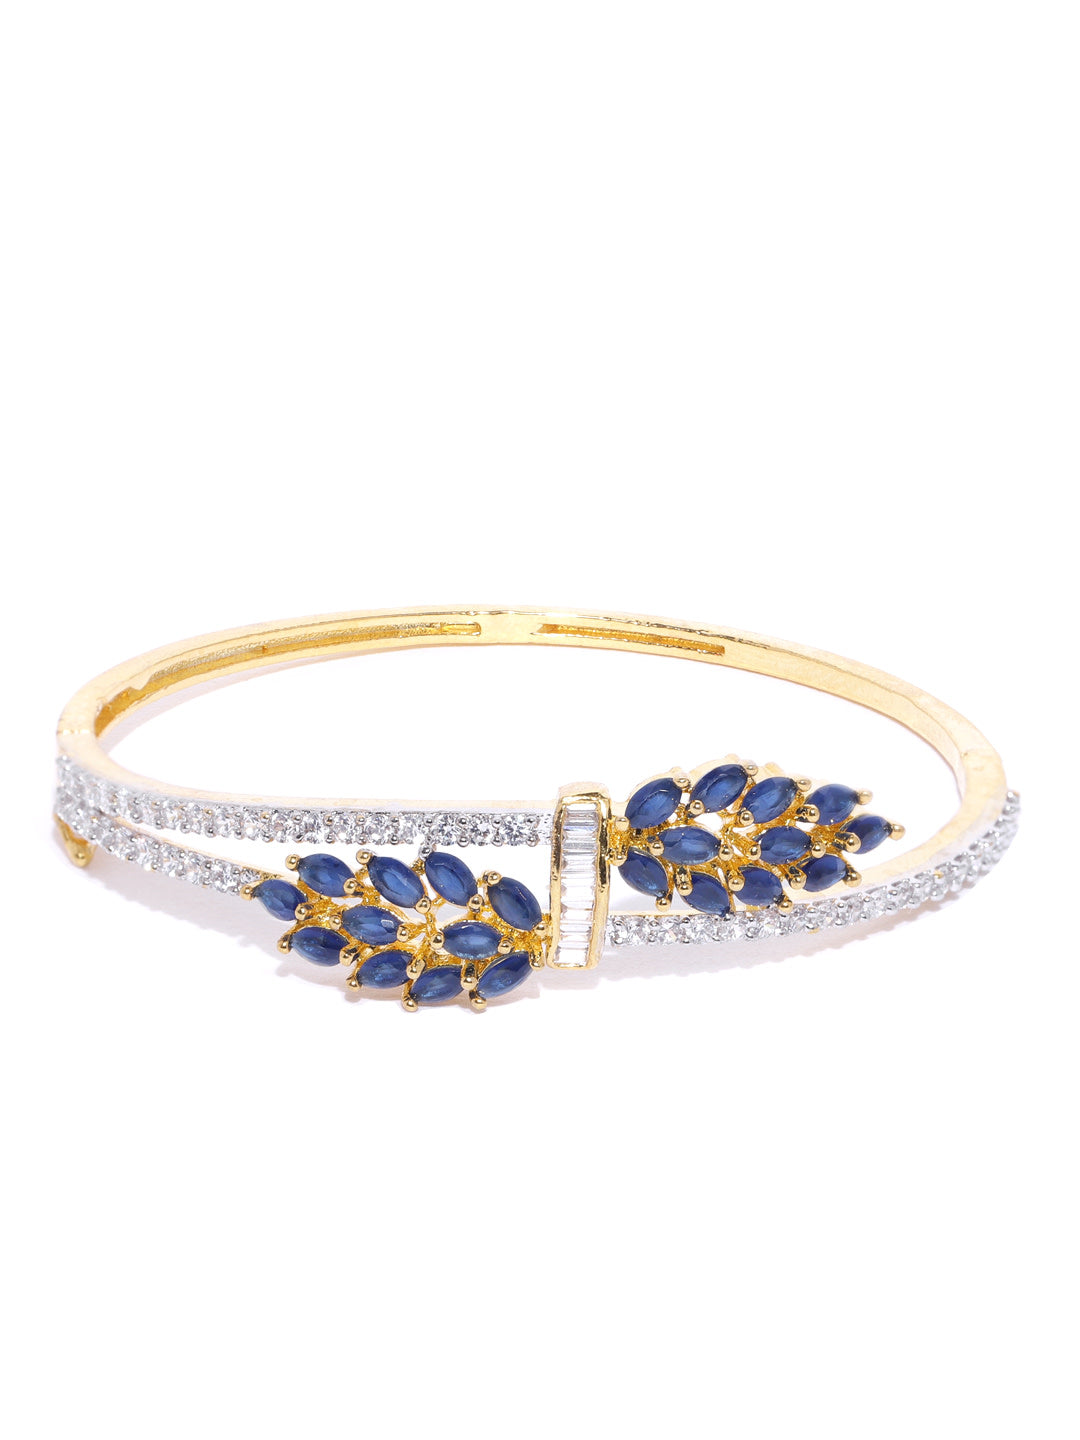 Gold-Plated American Diamond Studded, Floral Patterned Bracelet in Blue Color